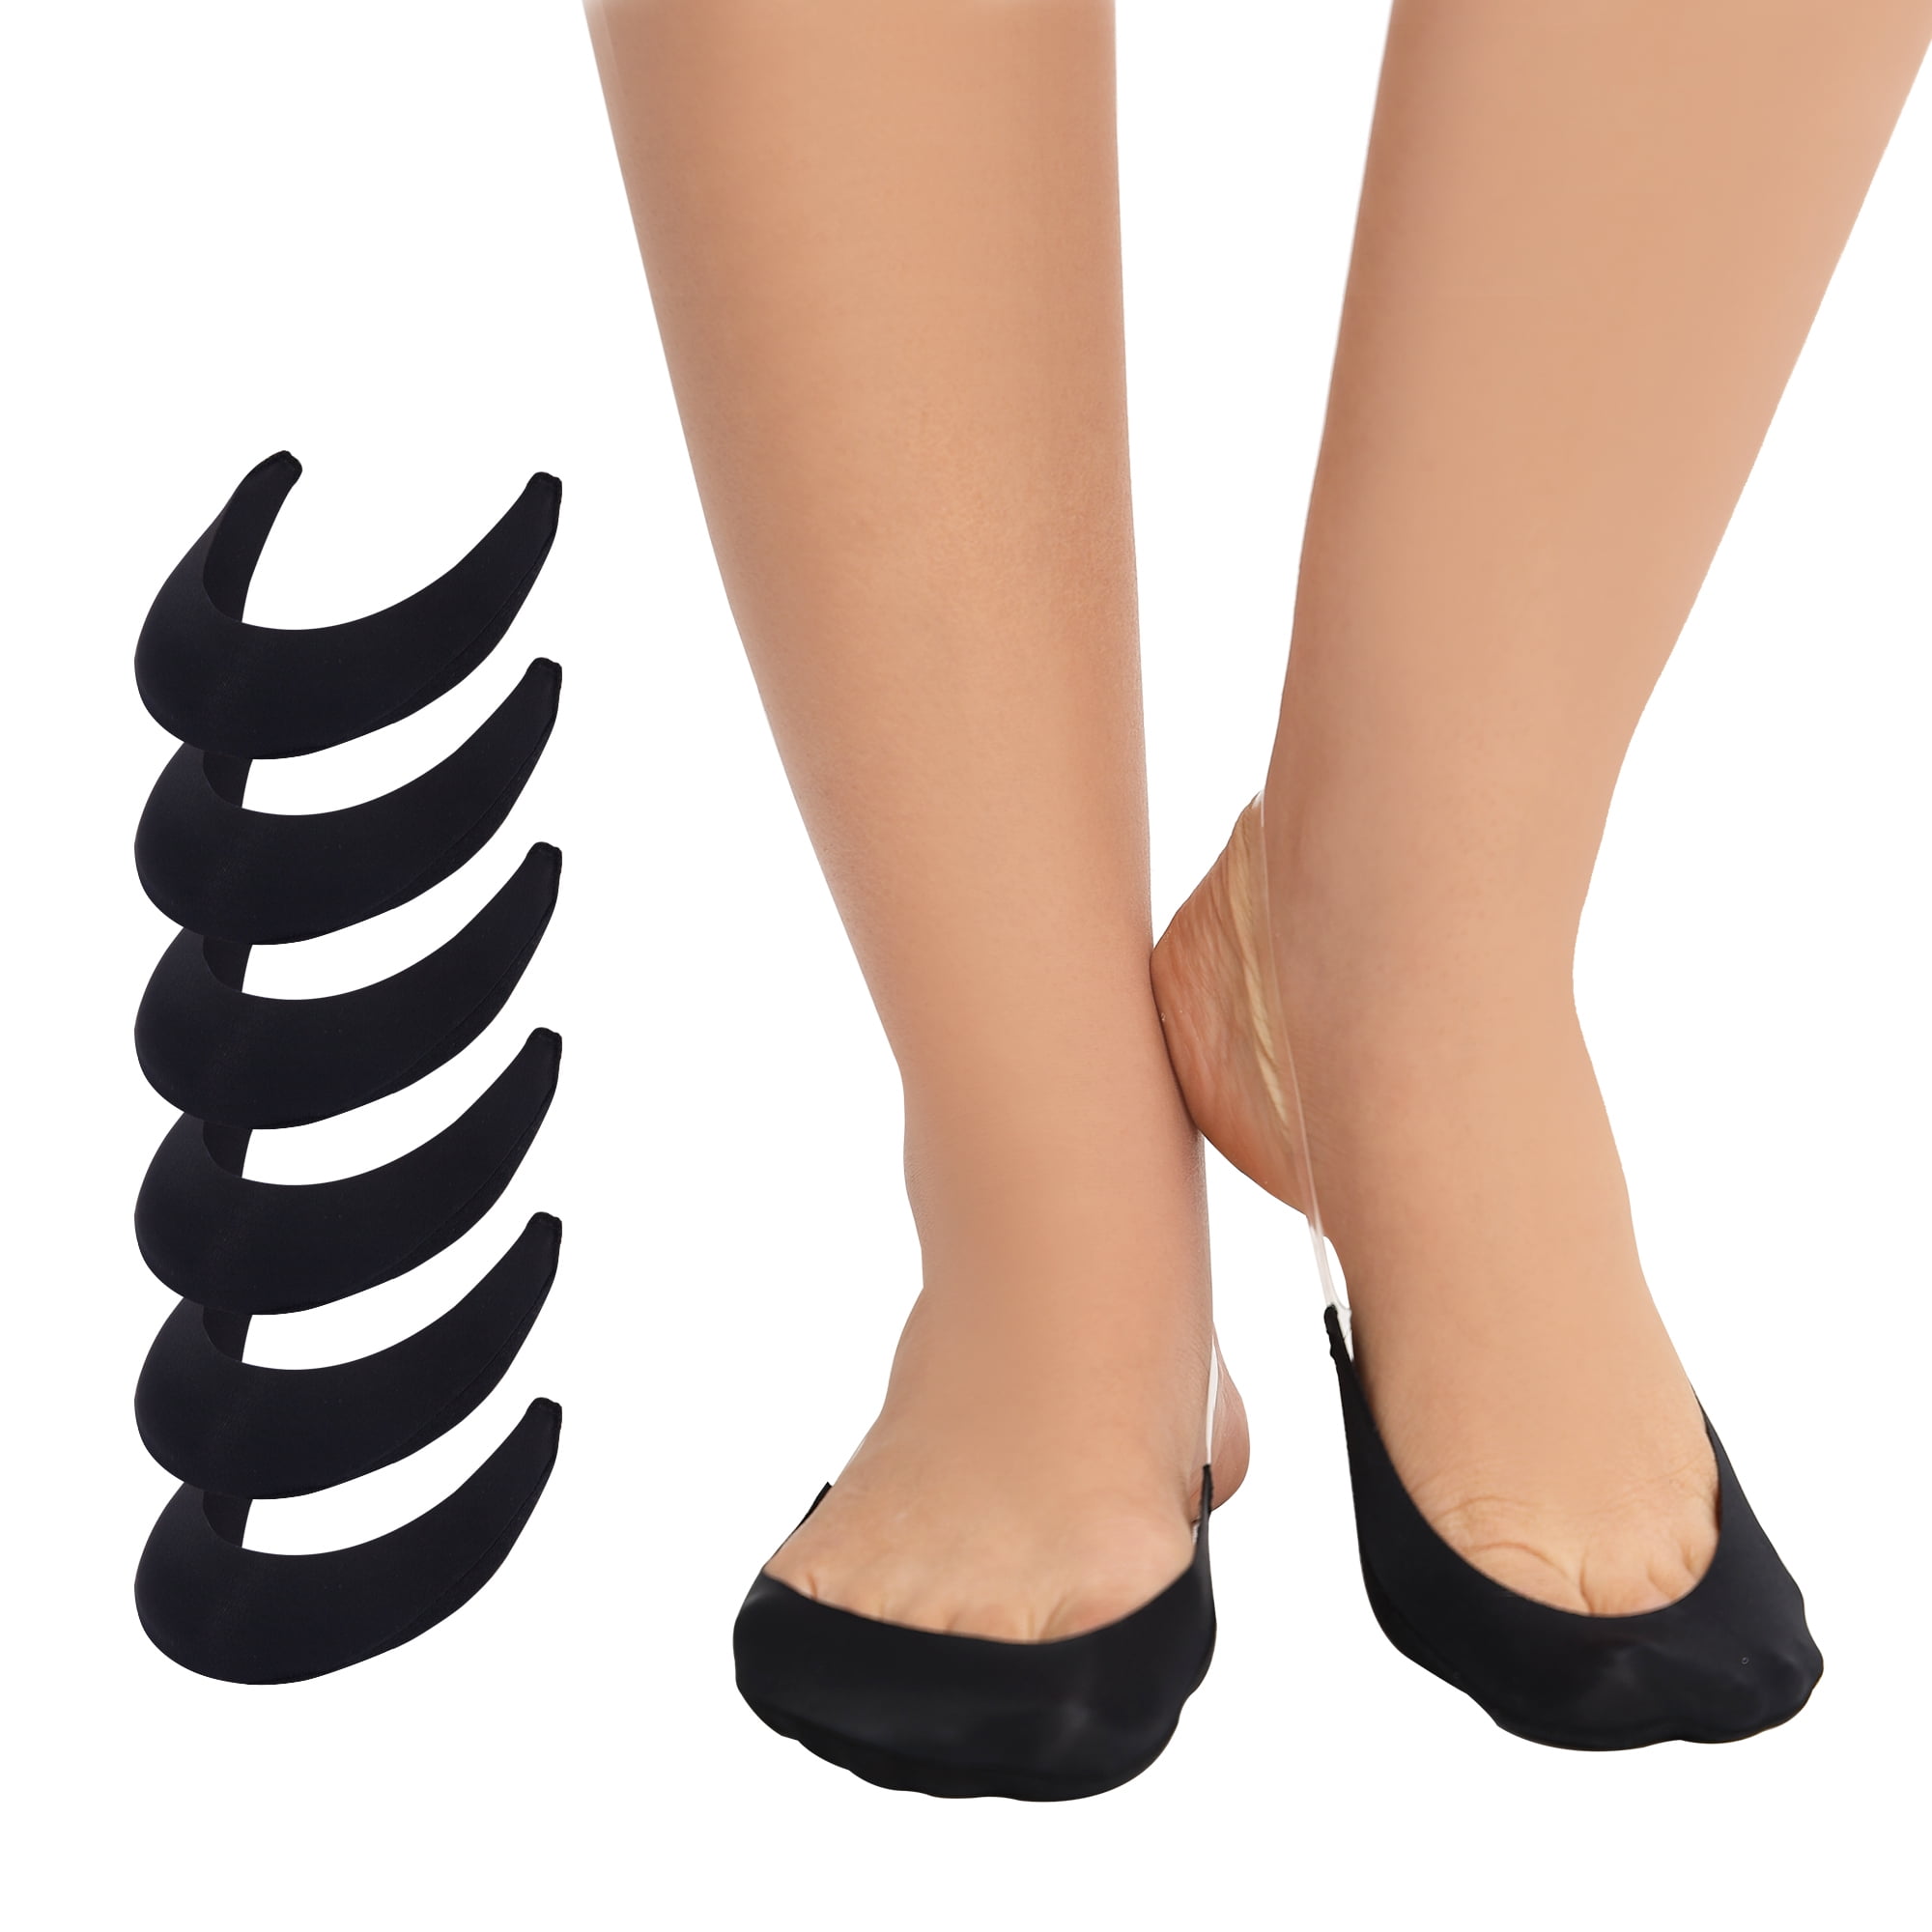 25 Types of Heels: The Ultimate Guide – Clickless® High Heel Protectors